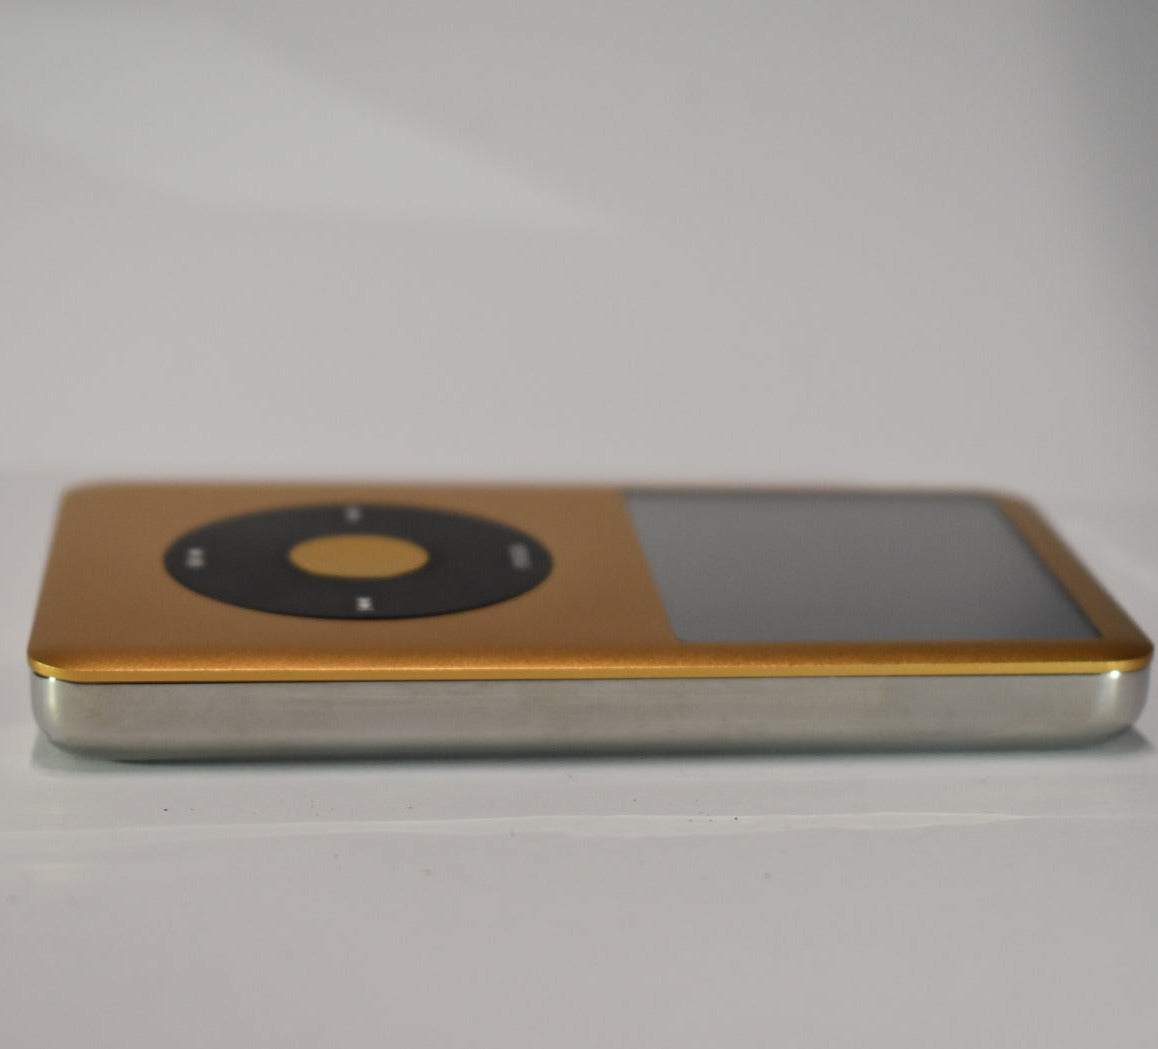 iPod classic - Gold and Black | Flash Storage and Extended Battery